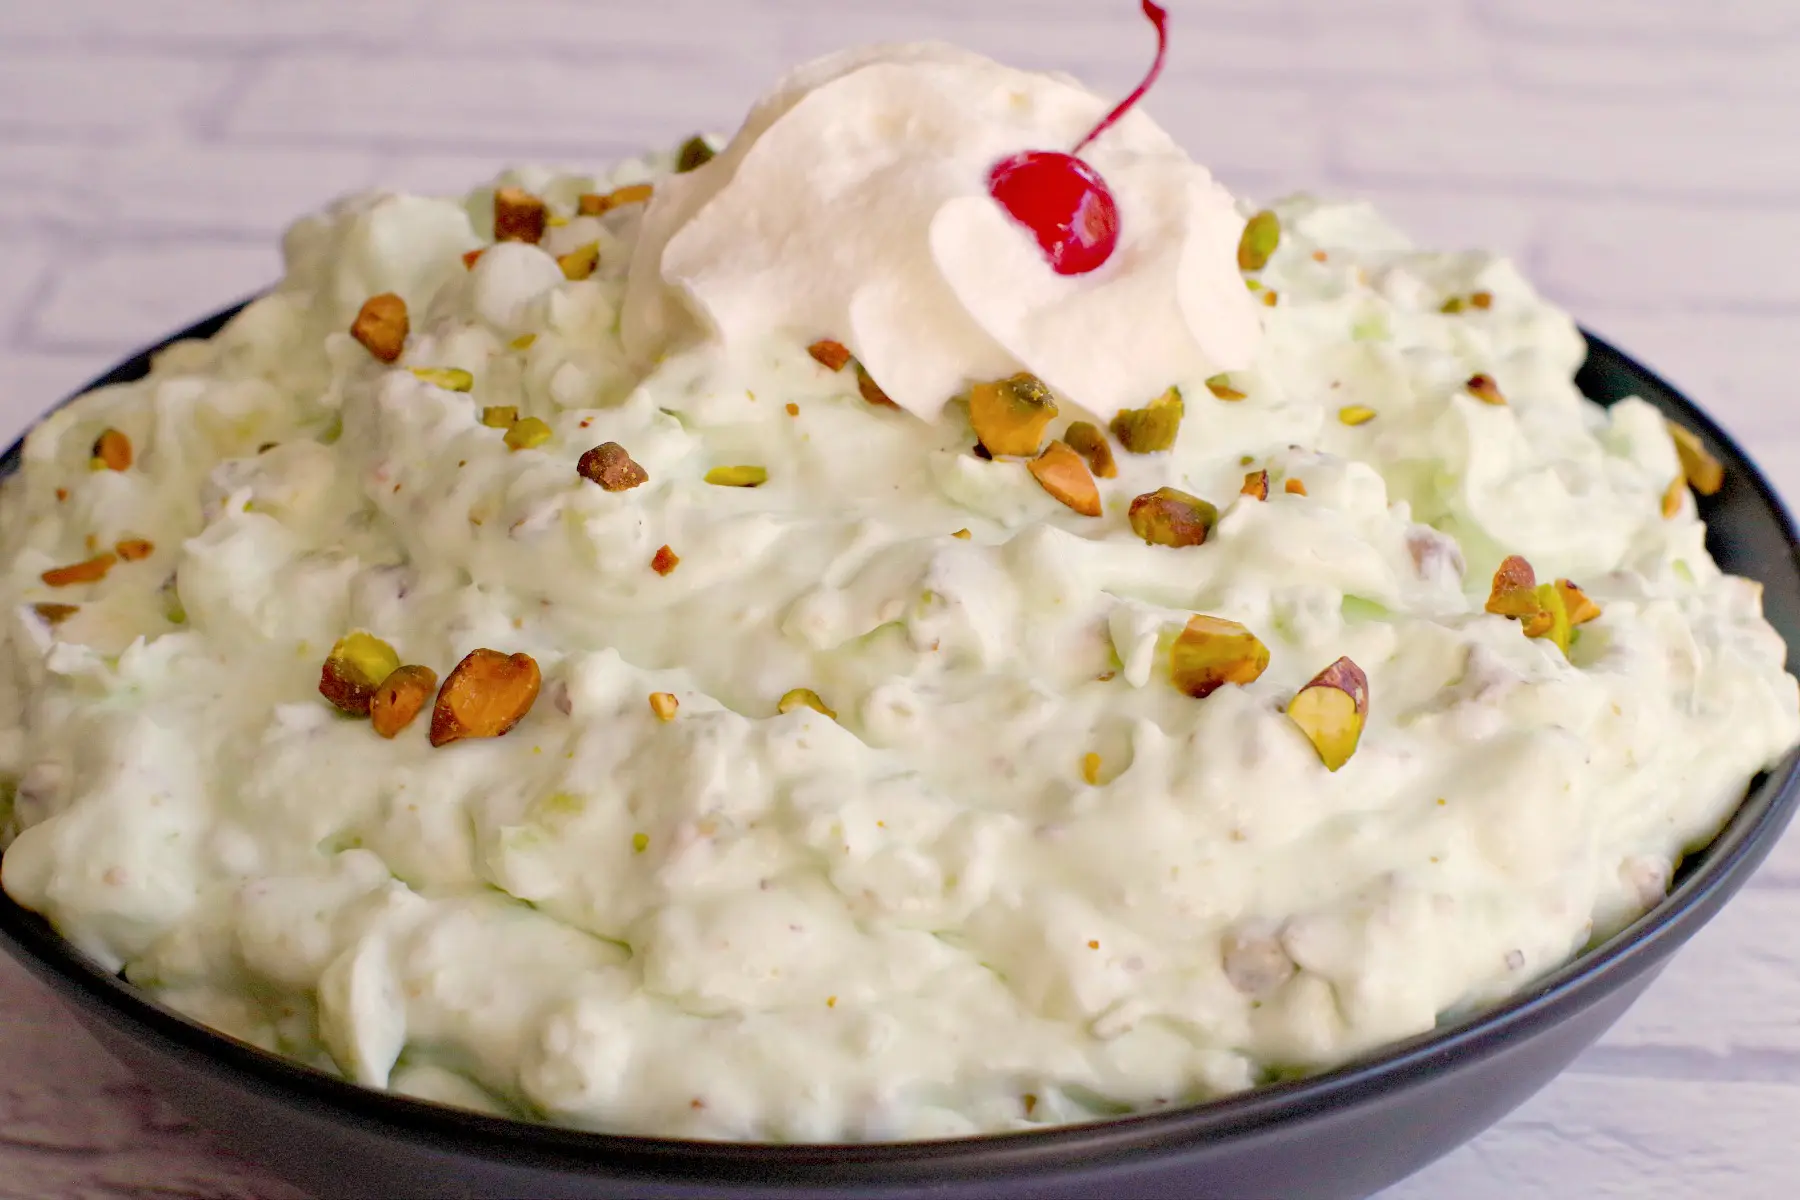 watergate salad in black bowl with whipped cream and cherry